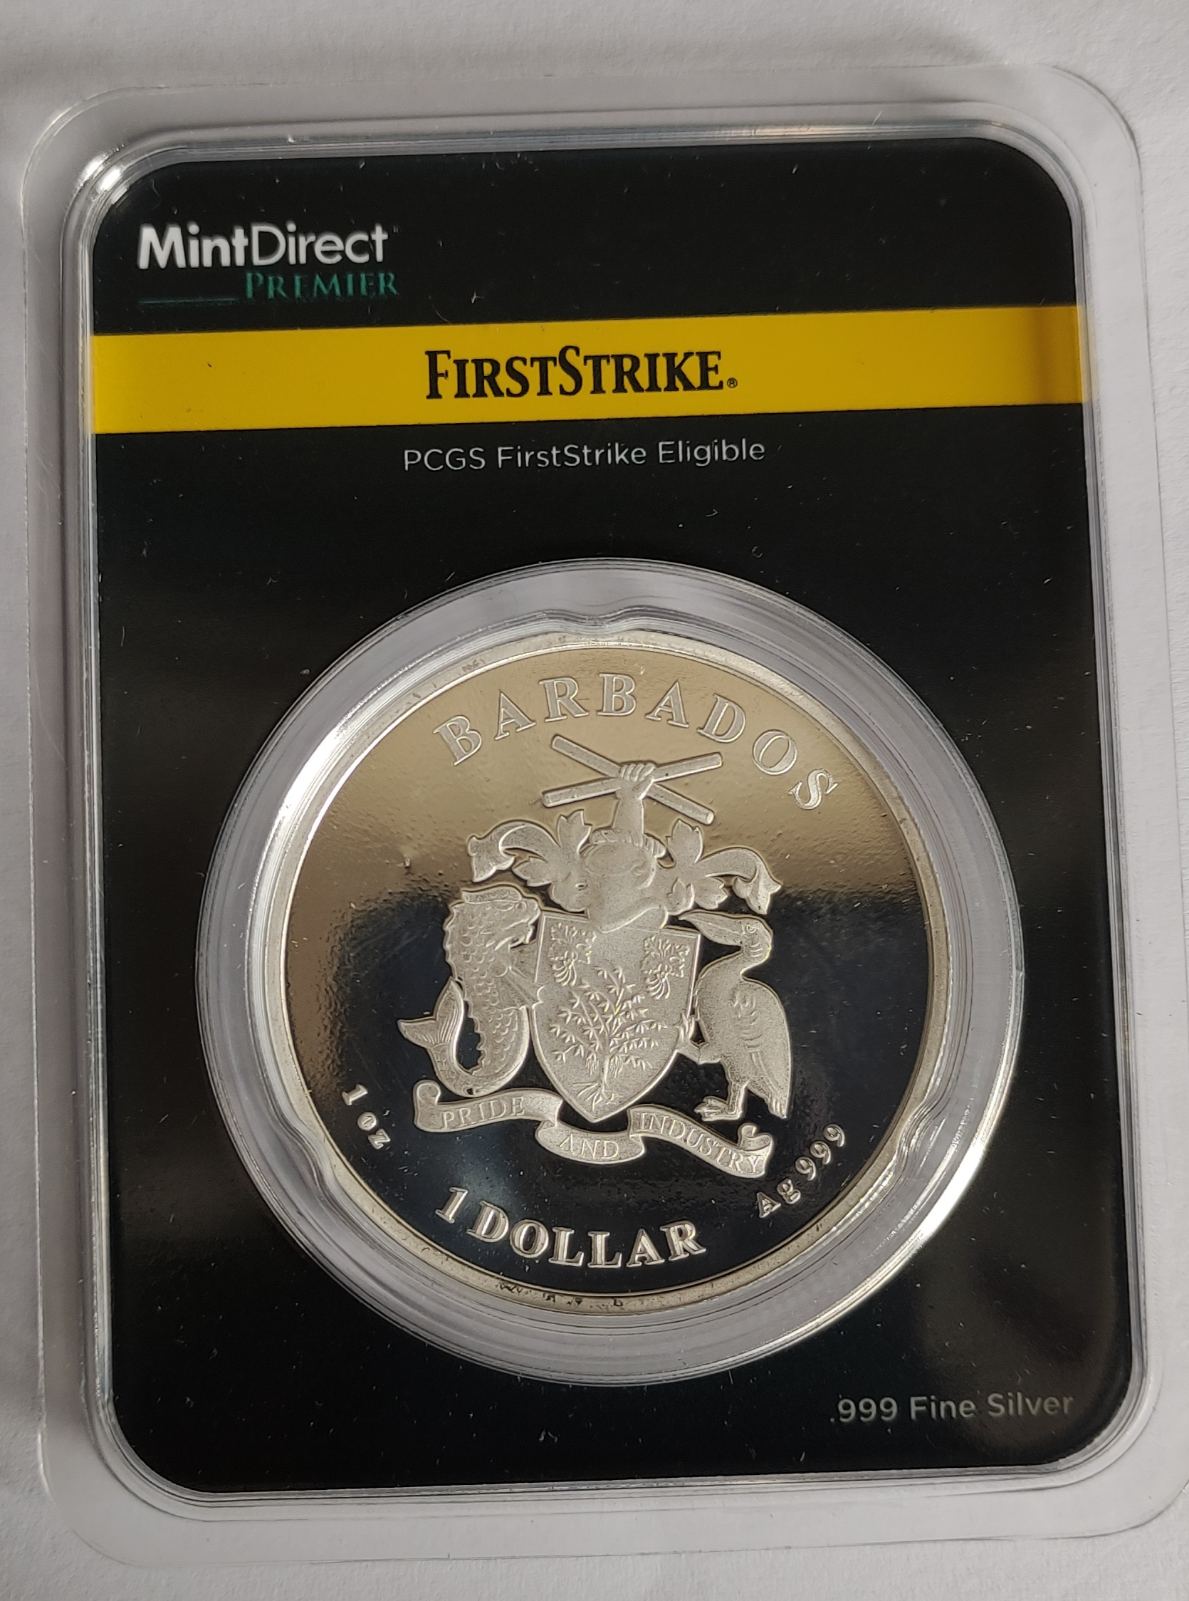 2022 Barbados Seahorse 1 oz Silver Coin in MintDirect Premier Packaging + PCGS FirstStrike Eligible